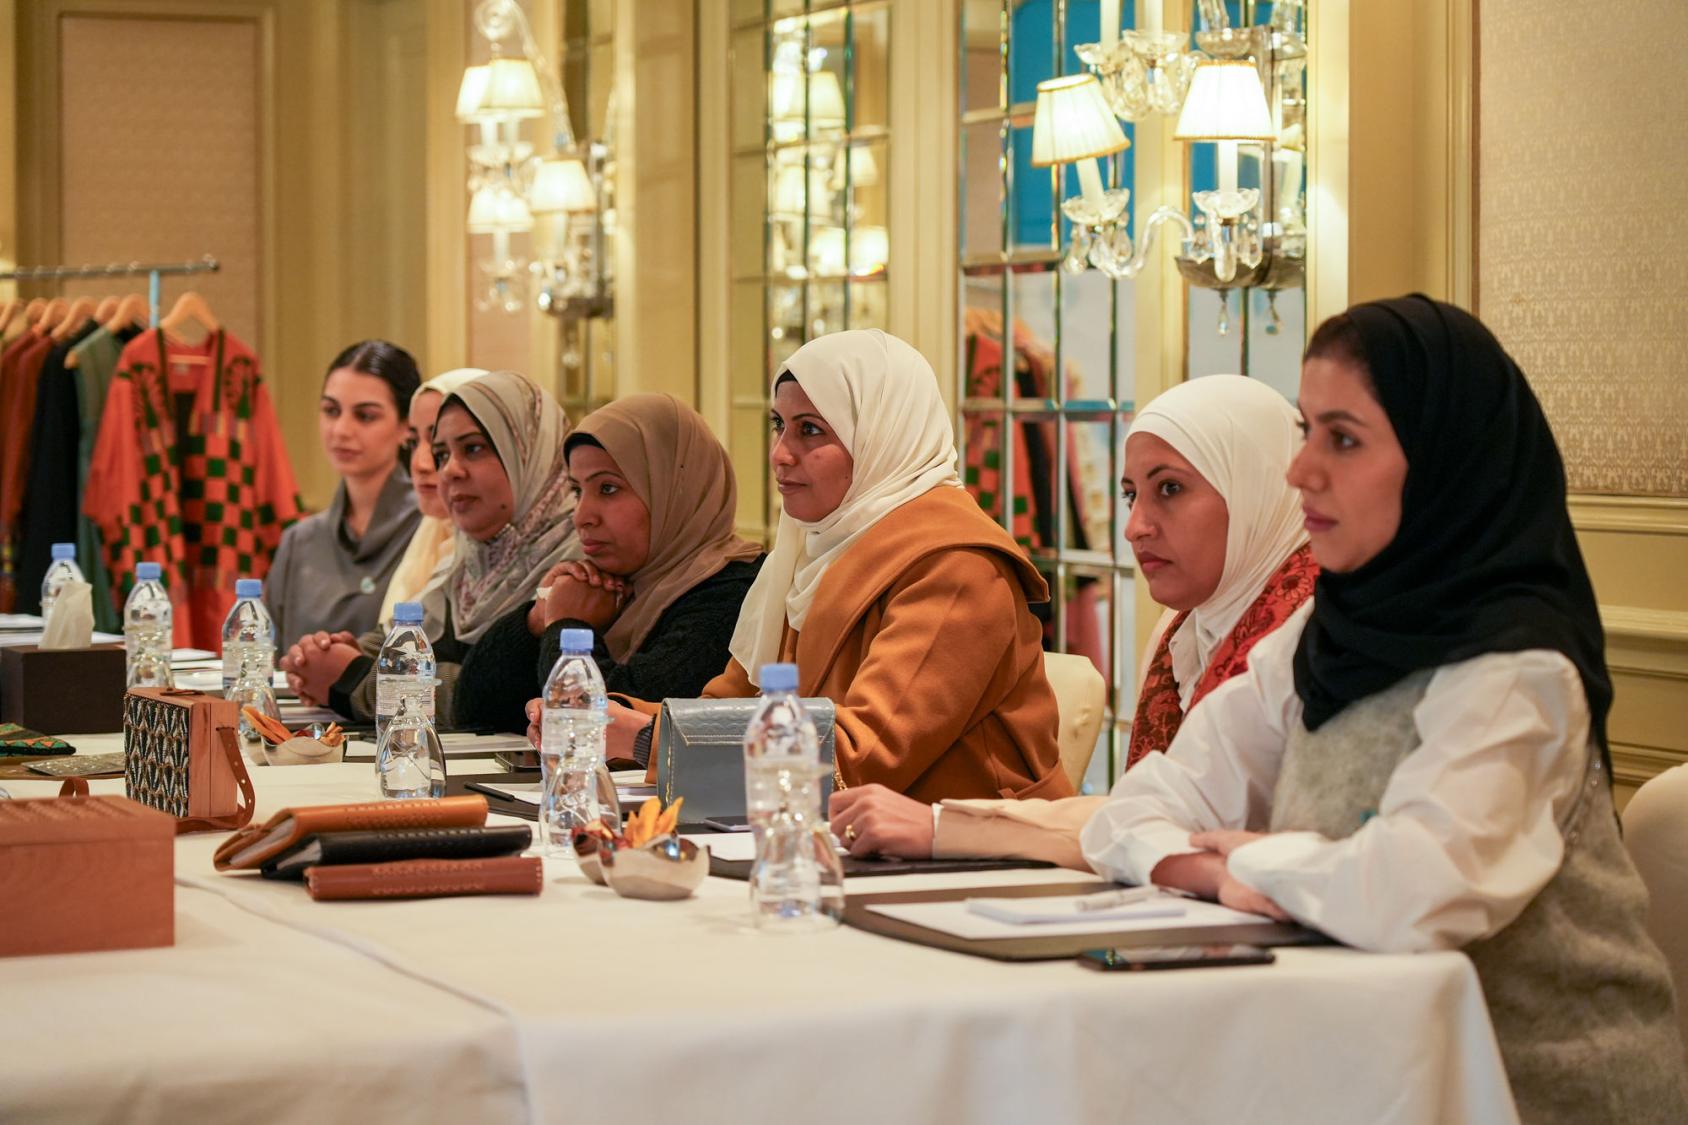 A group of Egyptian women sit at a table with a white tablecloth, as if in a meeting